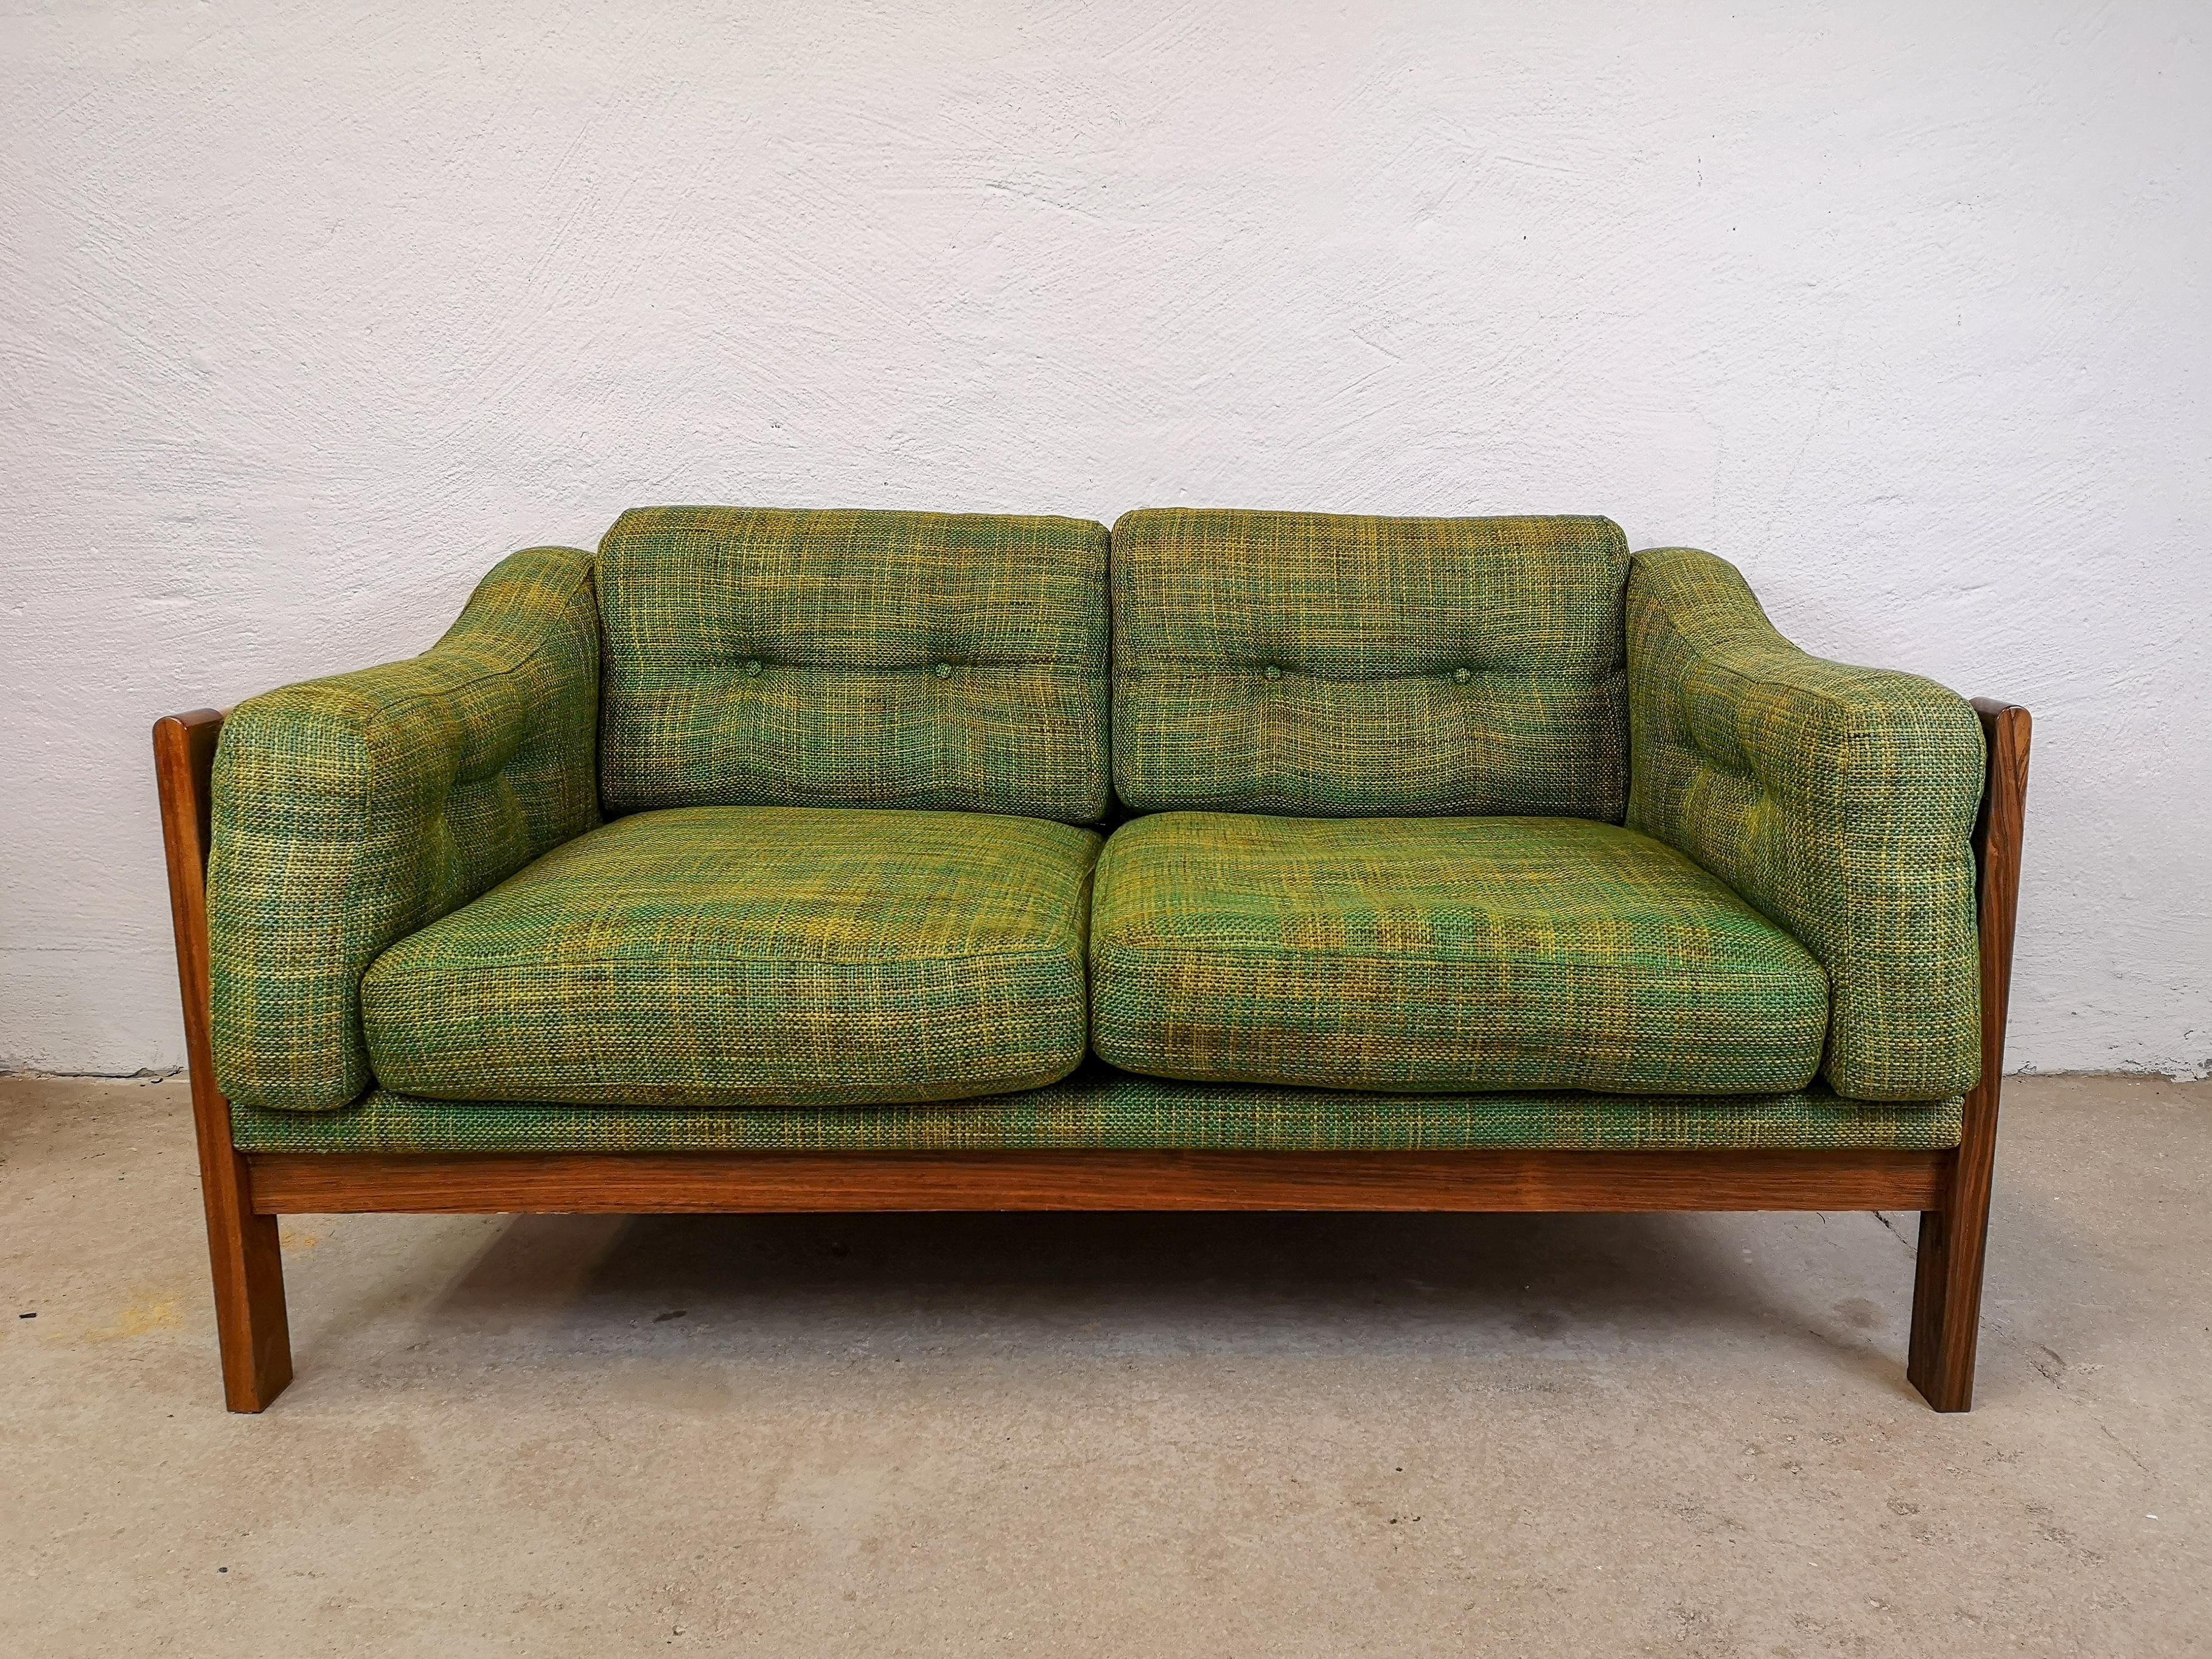 This 2-seat sofa made in Sweden for Futura Furniture in the 1960s, is made in rosewood and have green cushions seats.
Because of the expensive manufacturing it was only produced in 2 years. Designed by Ingvar Stockum.

Good